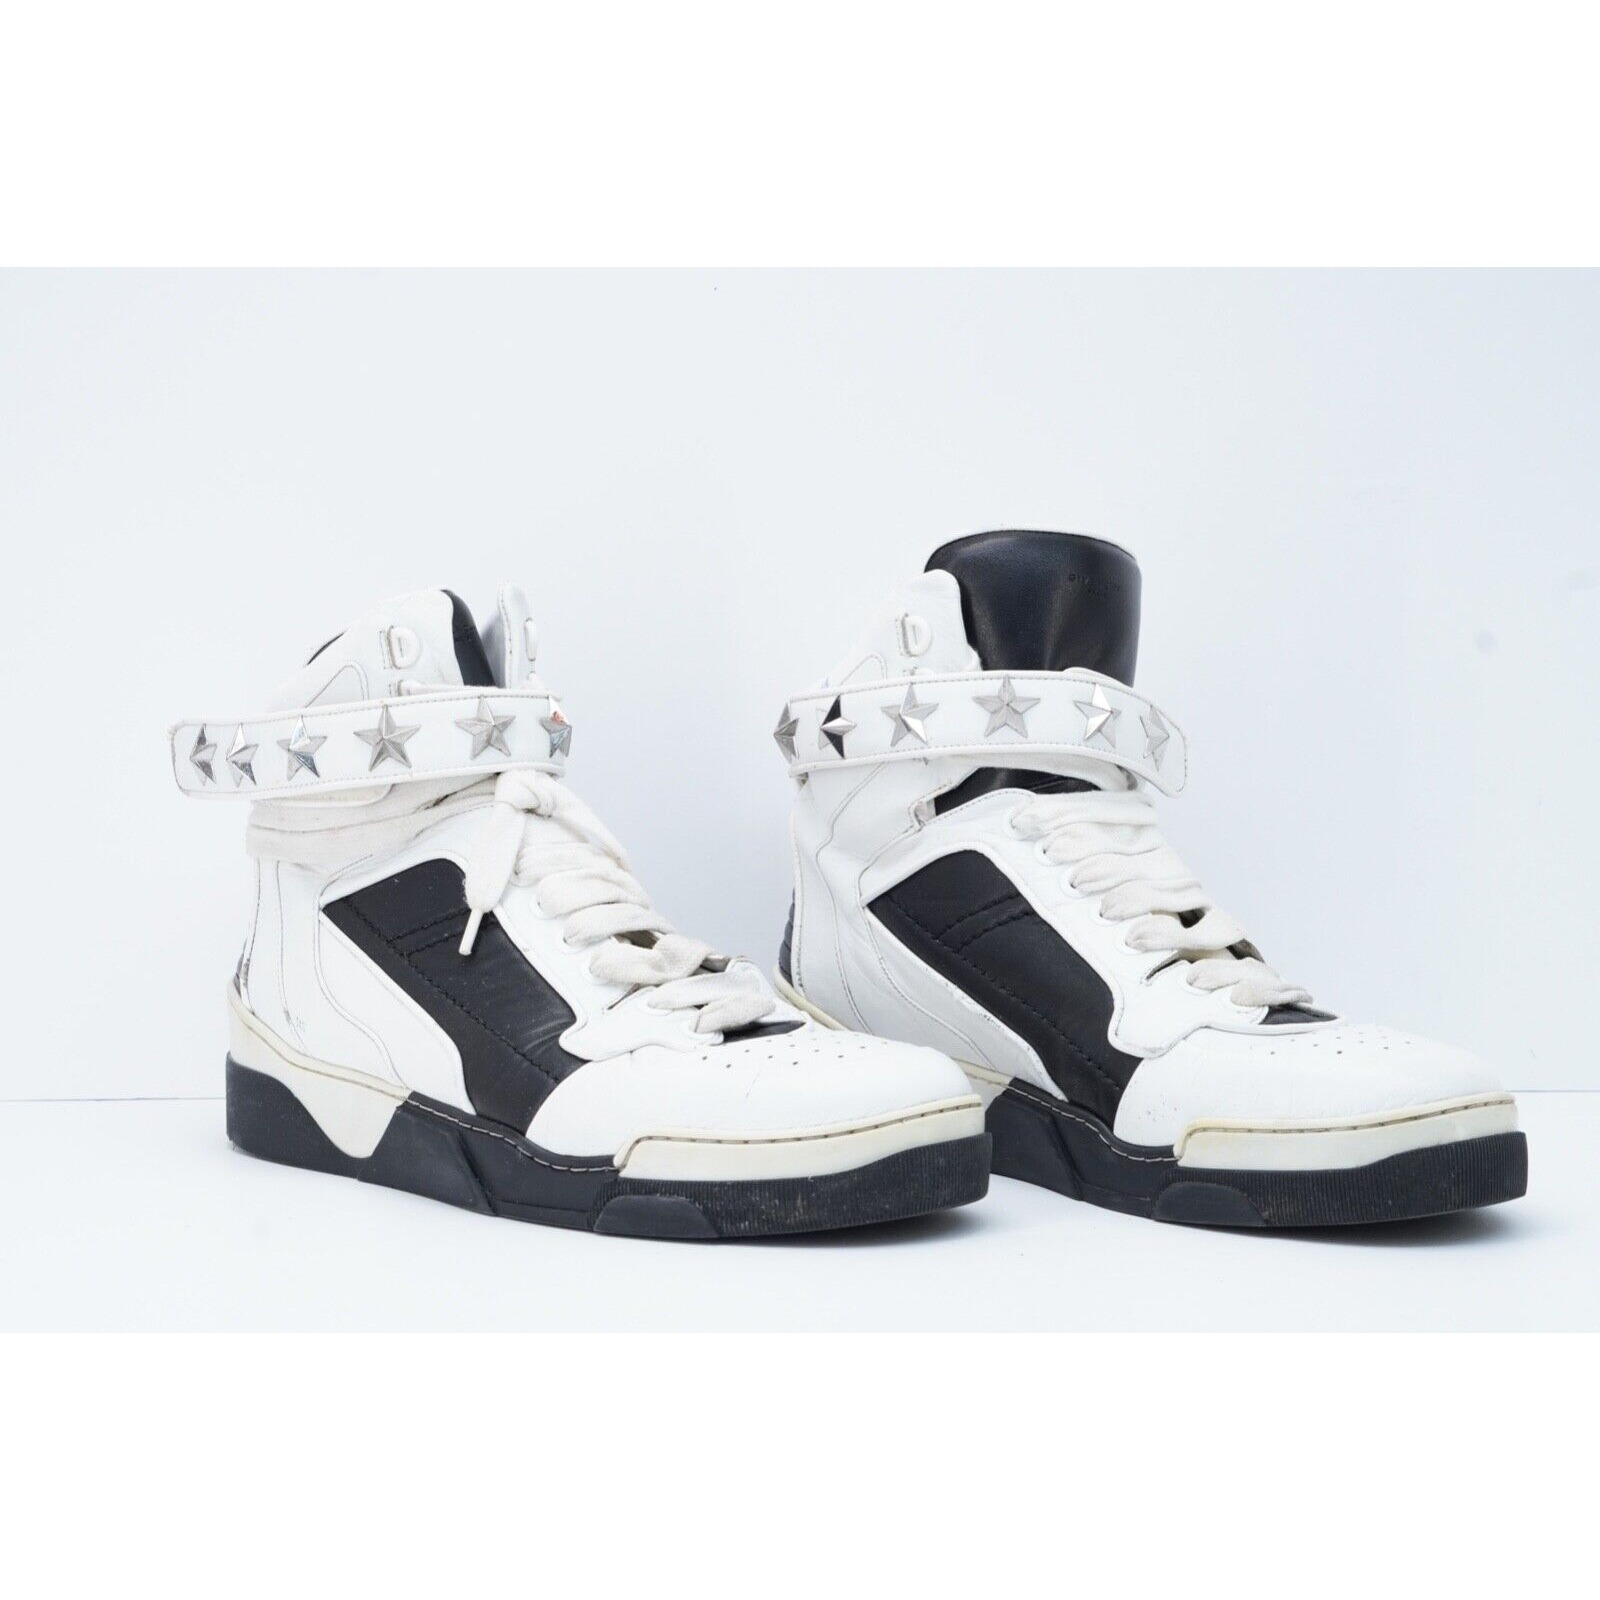 Givenchy Tyson Star Sneakers Shoes White Leather High Top 44 - 2